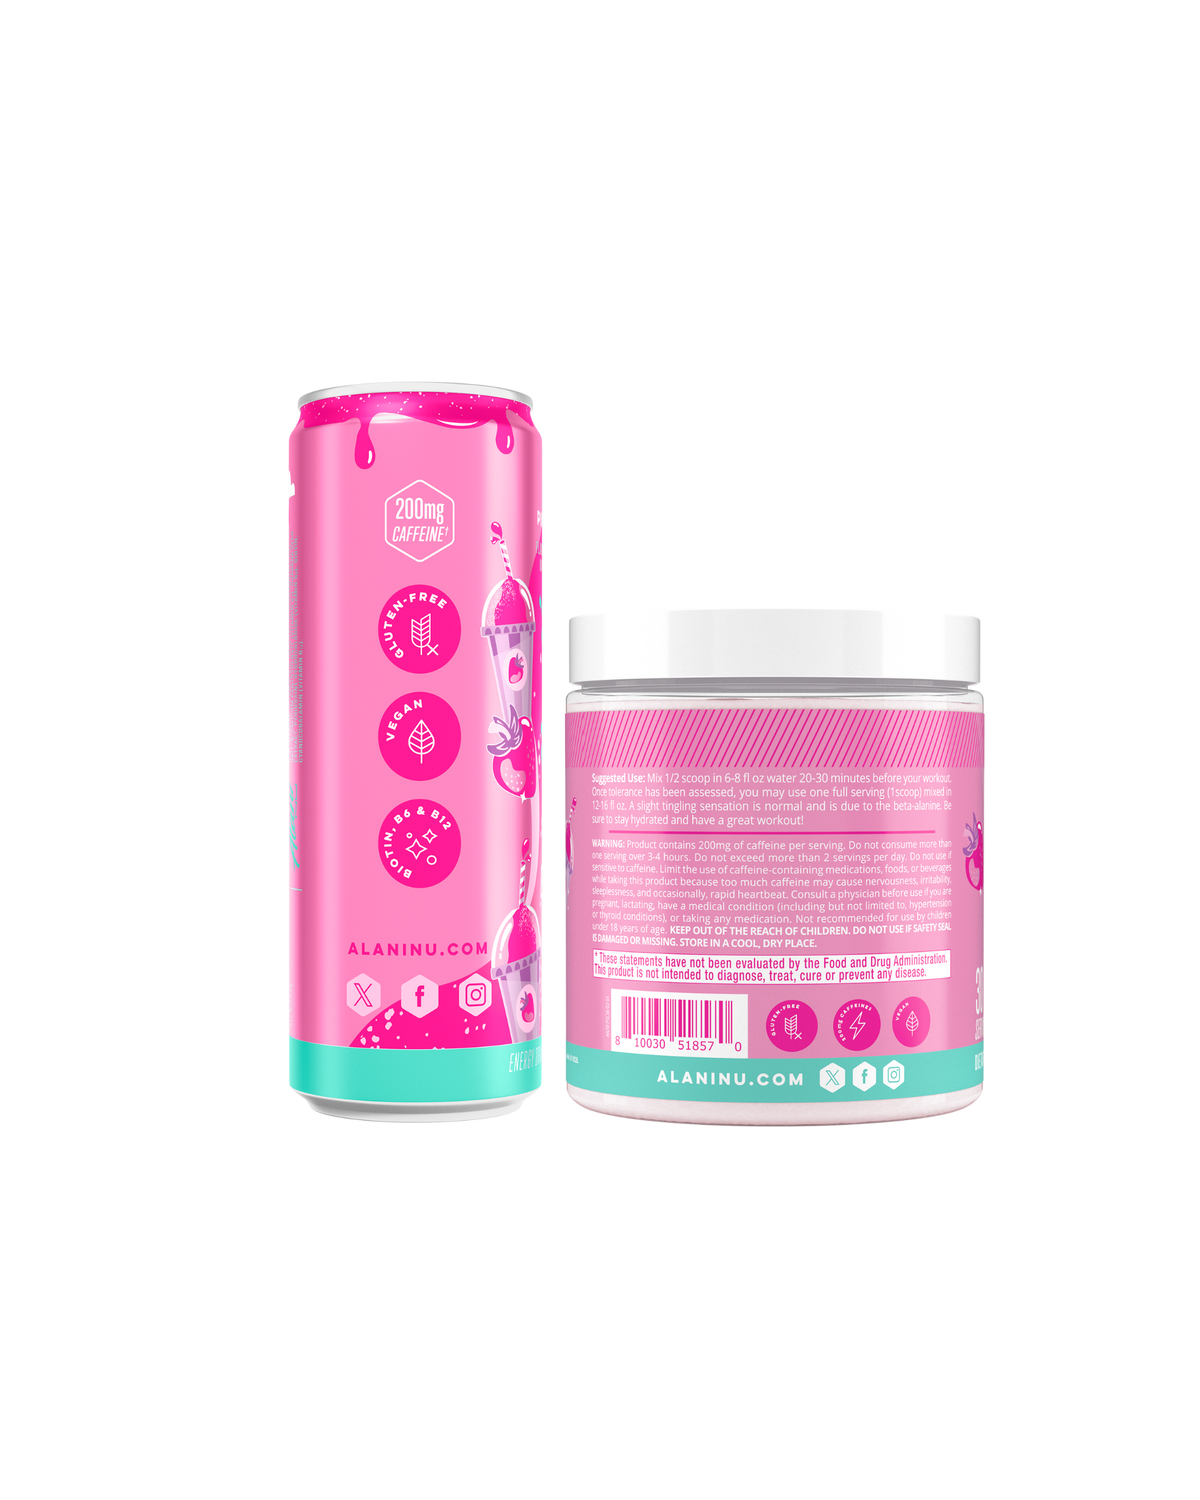 The side view of an Alani Nu Pink Slush Energy Drink can and Pre-Workout tub 